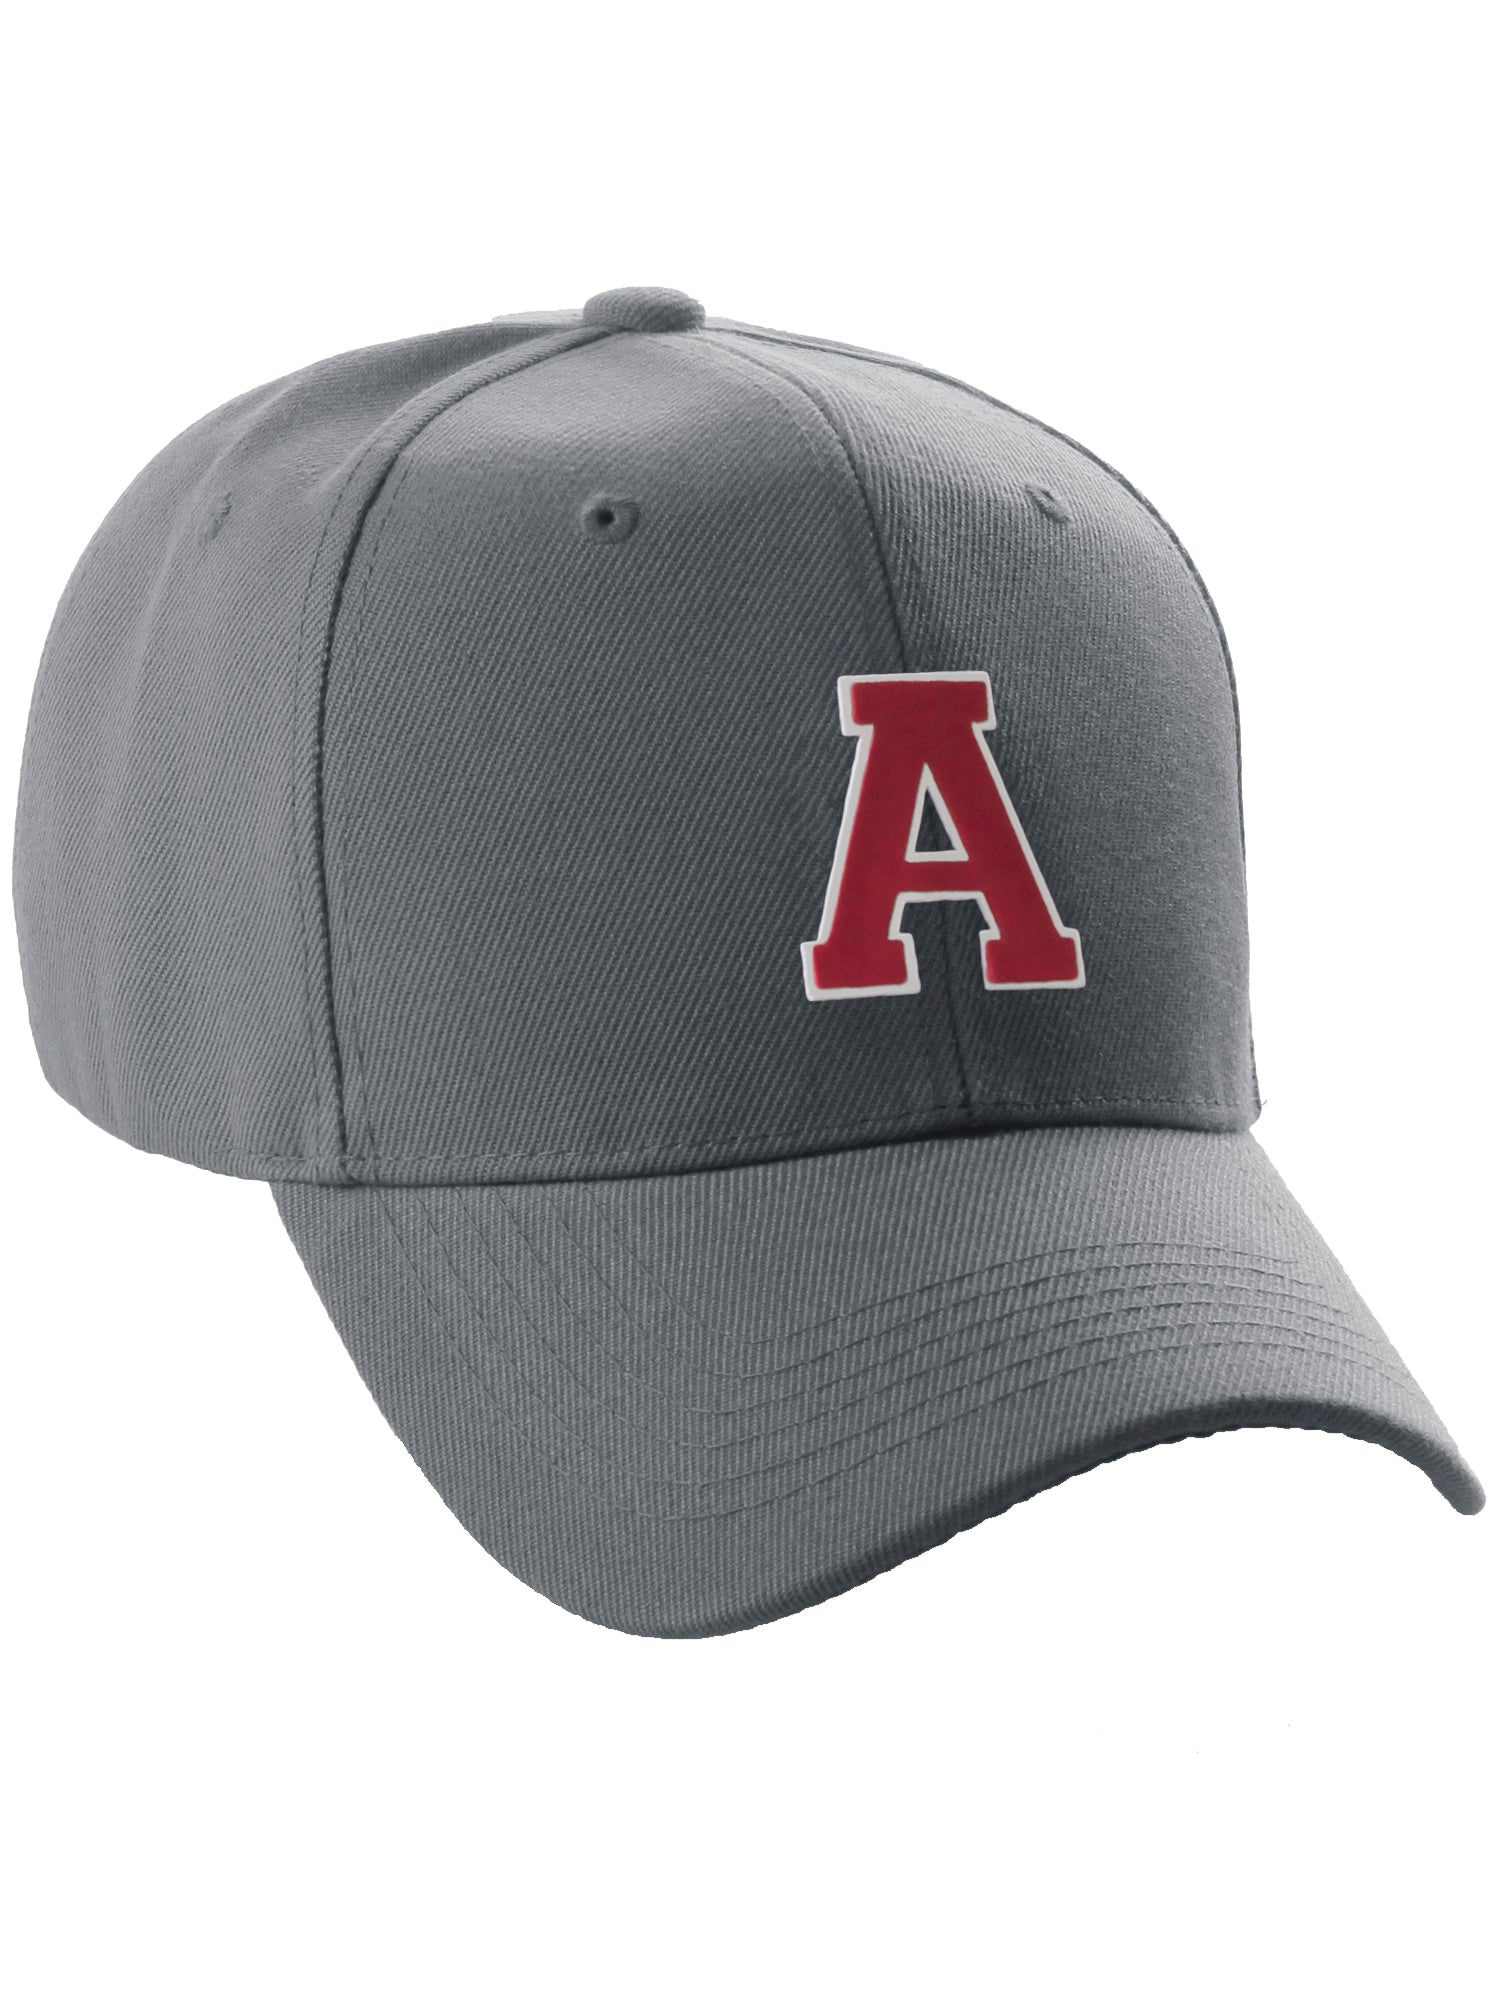 Classic Baseball Hat Custom Charcoal to Z Letter, Initial White A Team Cap Red